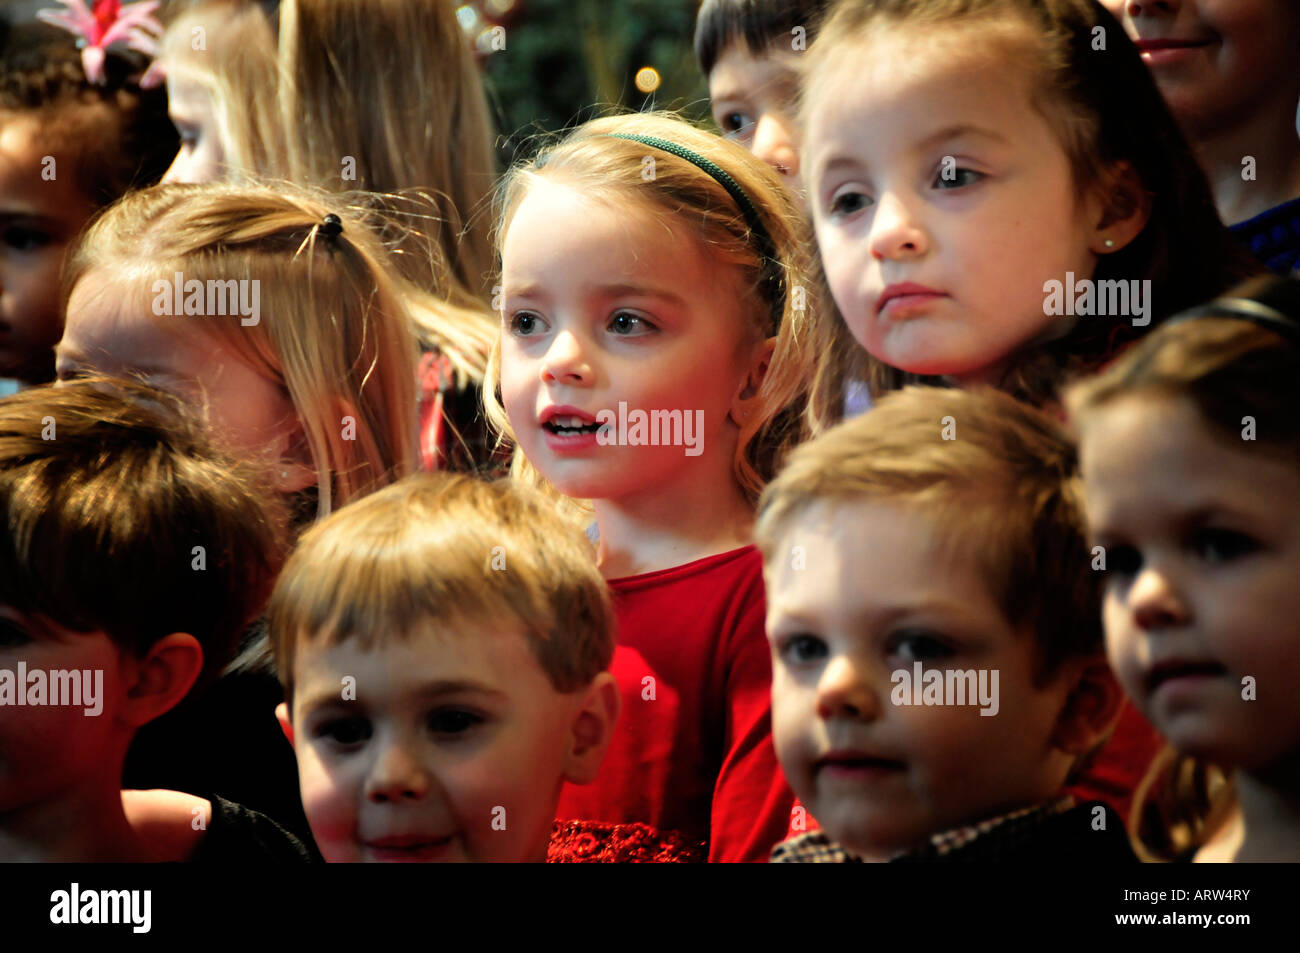 4 four year old pre school children hold recital performance for parents Stock Photo